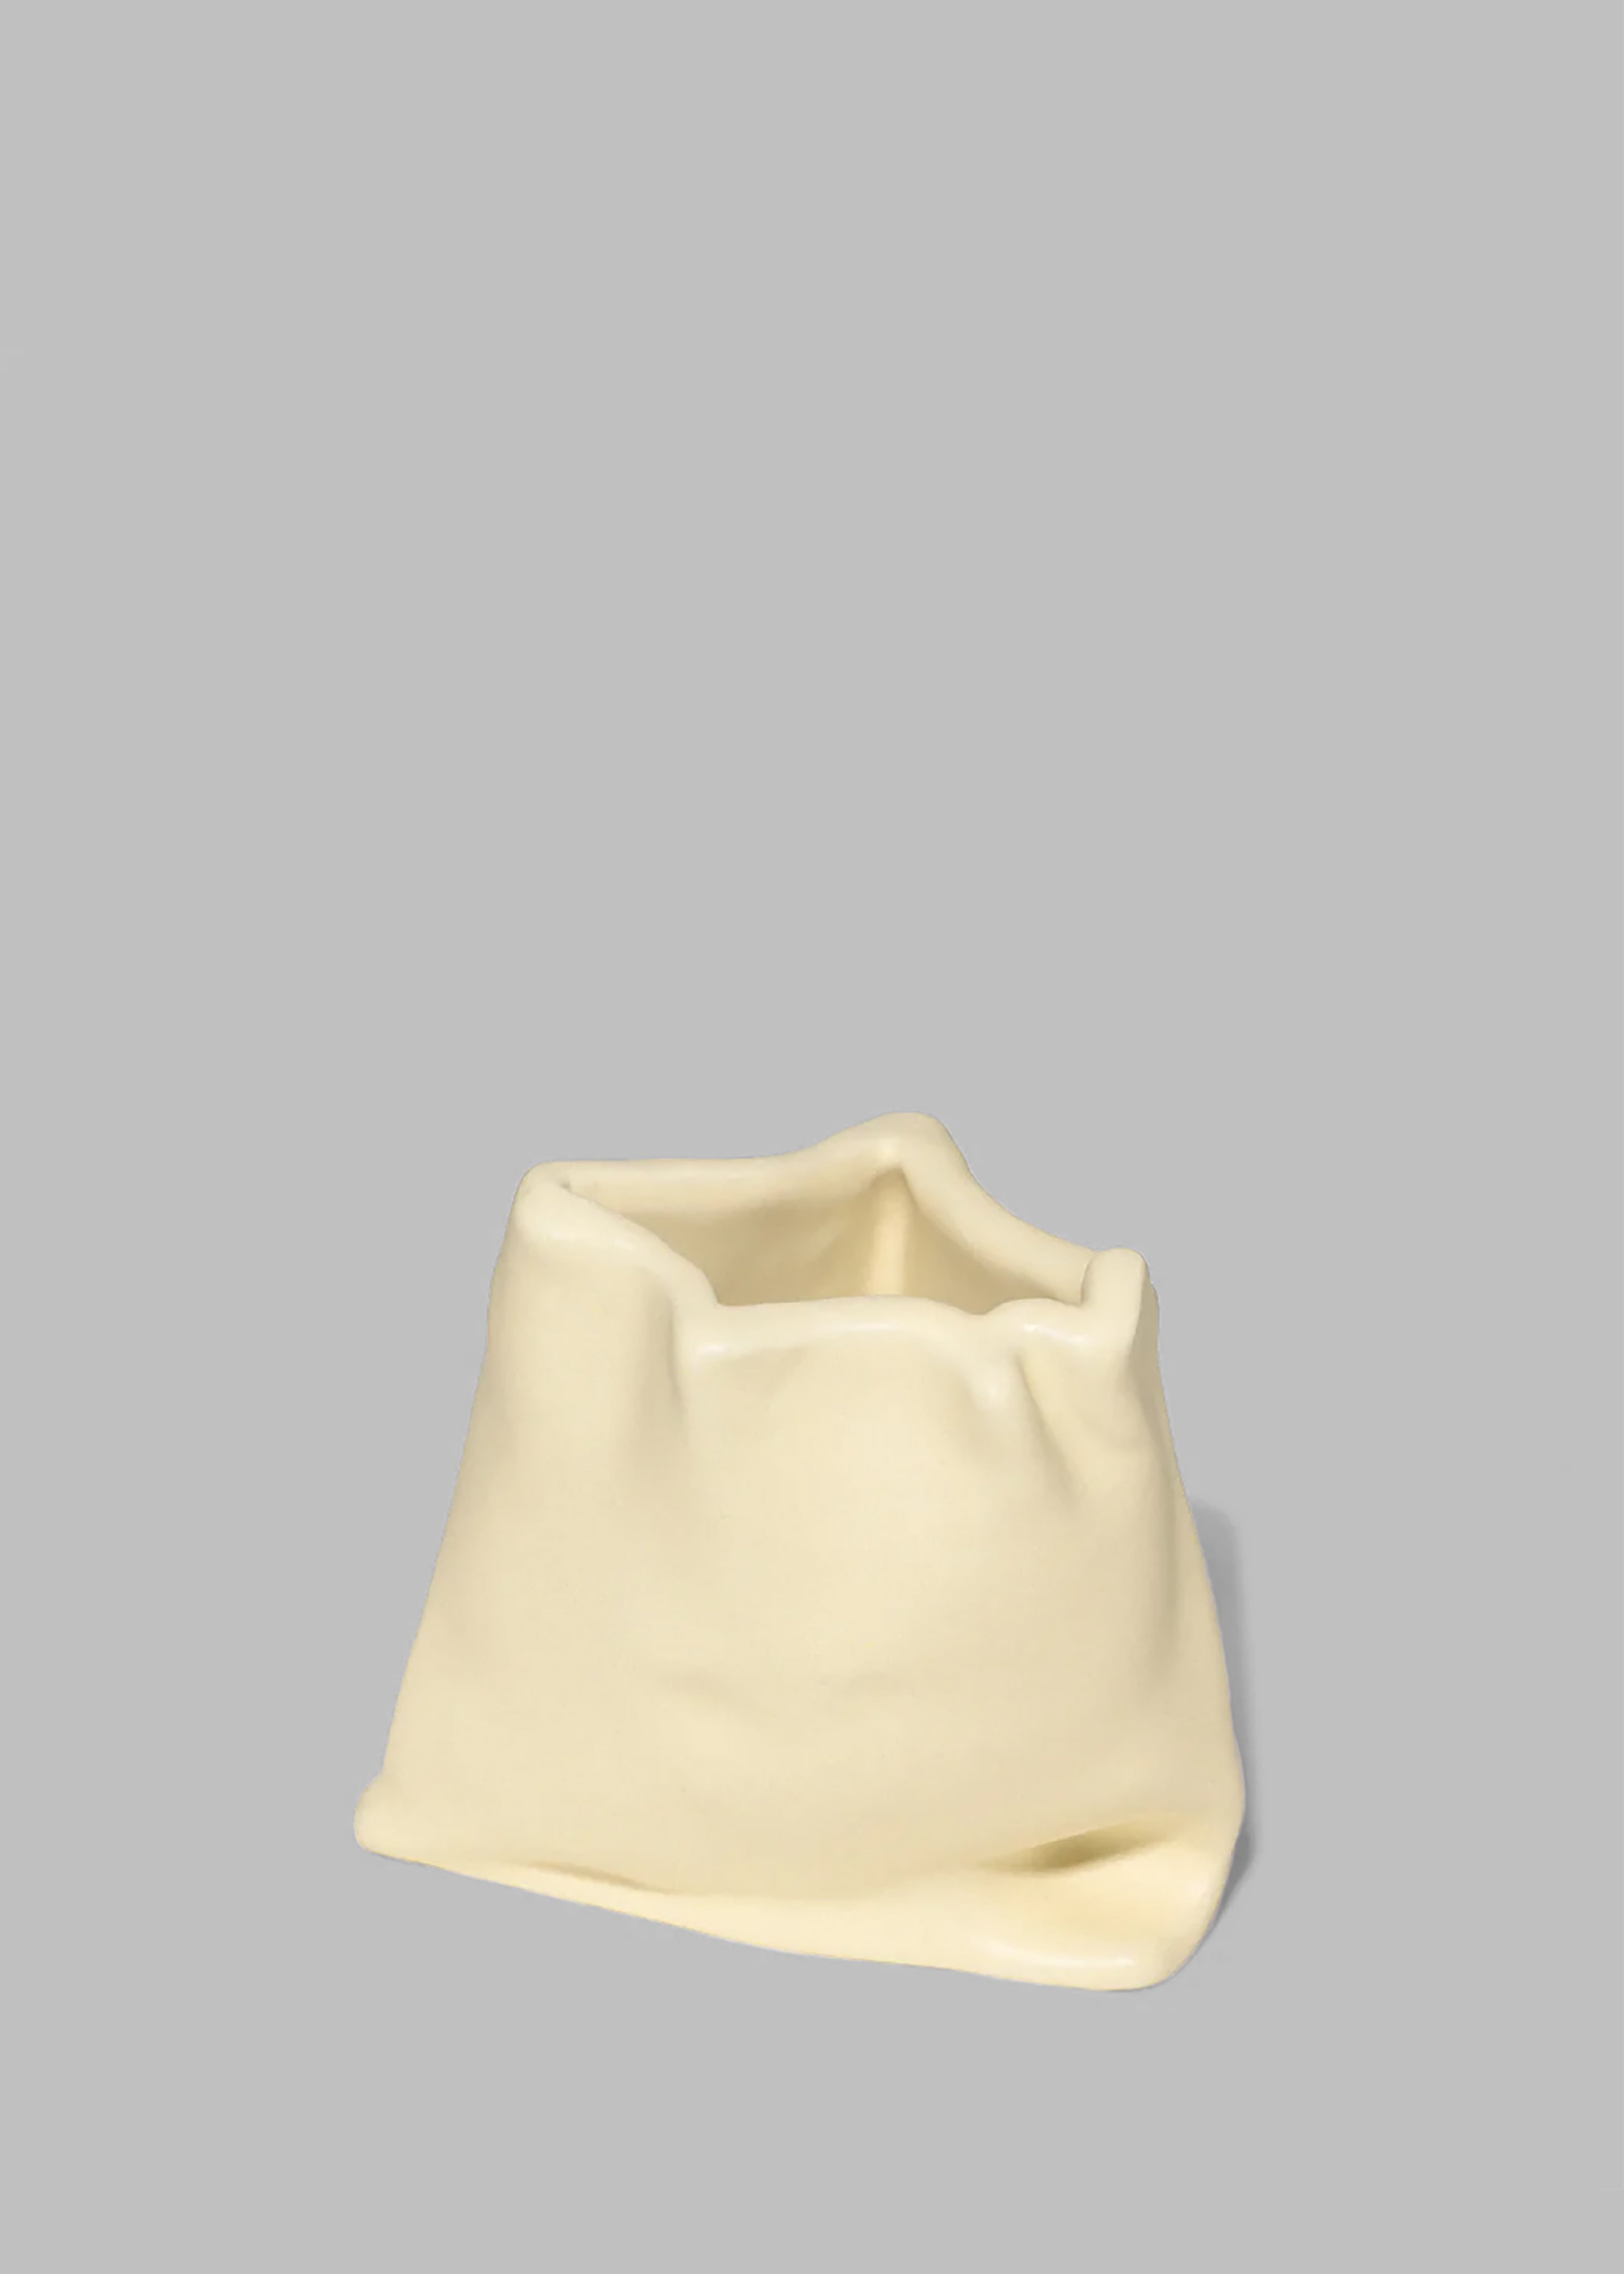 Completedworks Small Vessel - Matte Yellow - 1